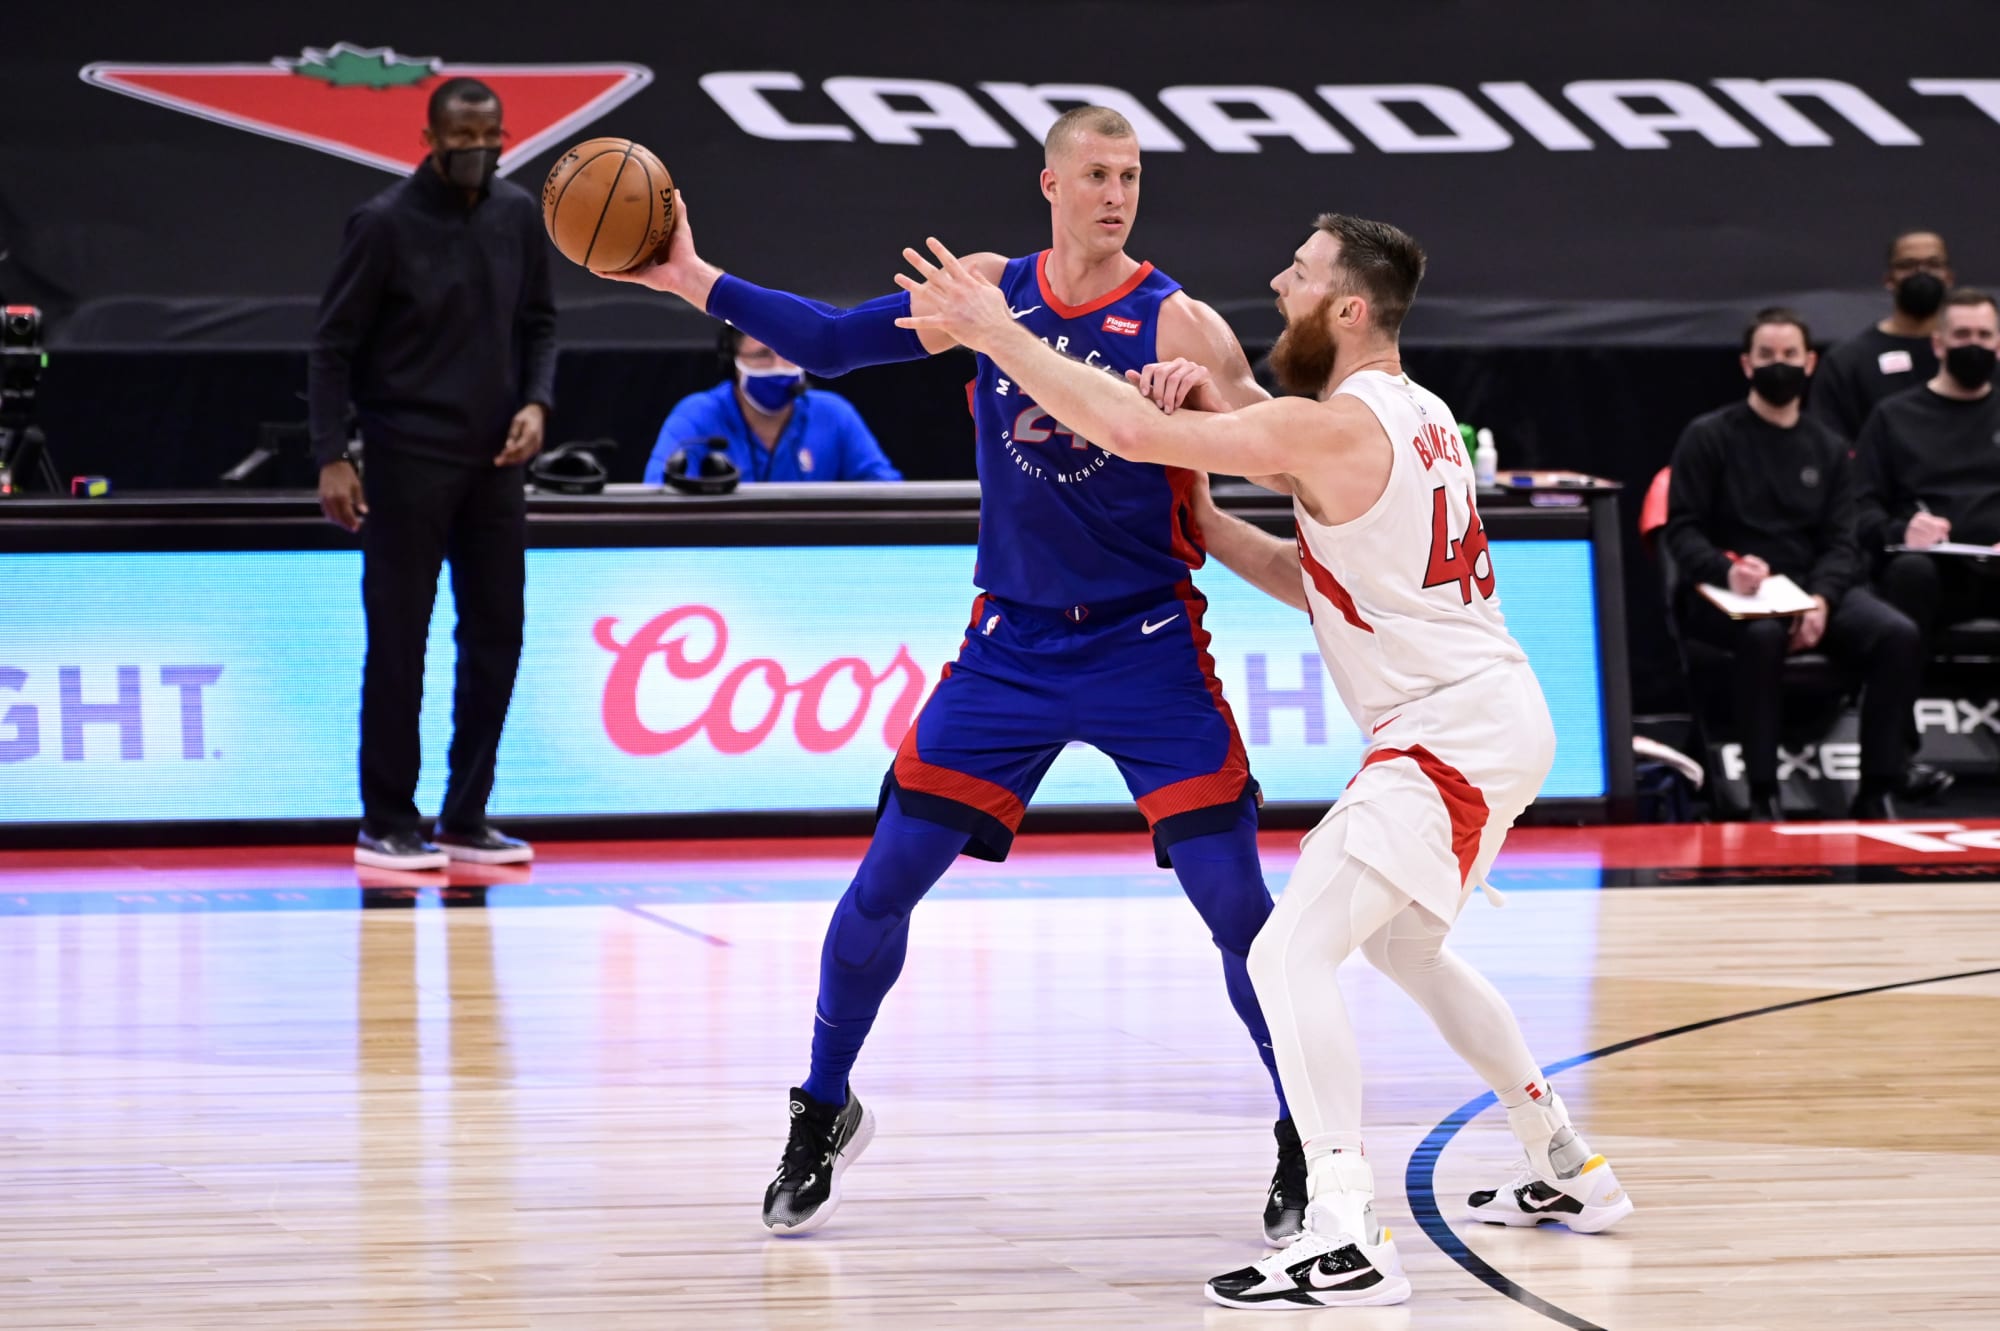 Detroit Pistons: Mason Plumlee could play for Team USA in Olympics - Page 2